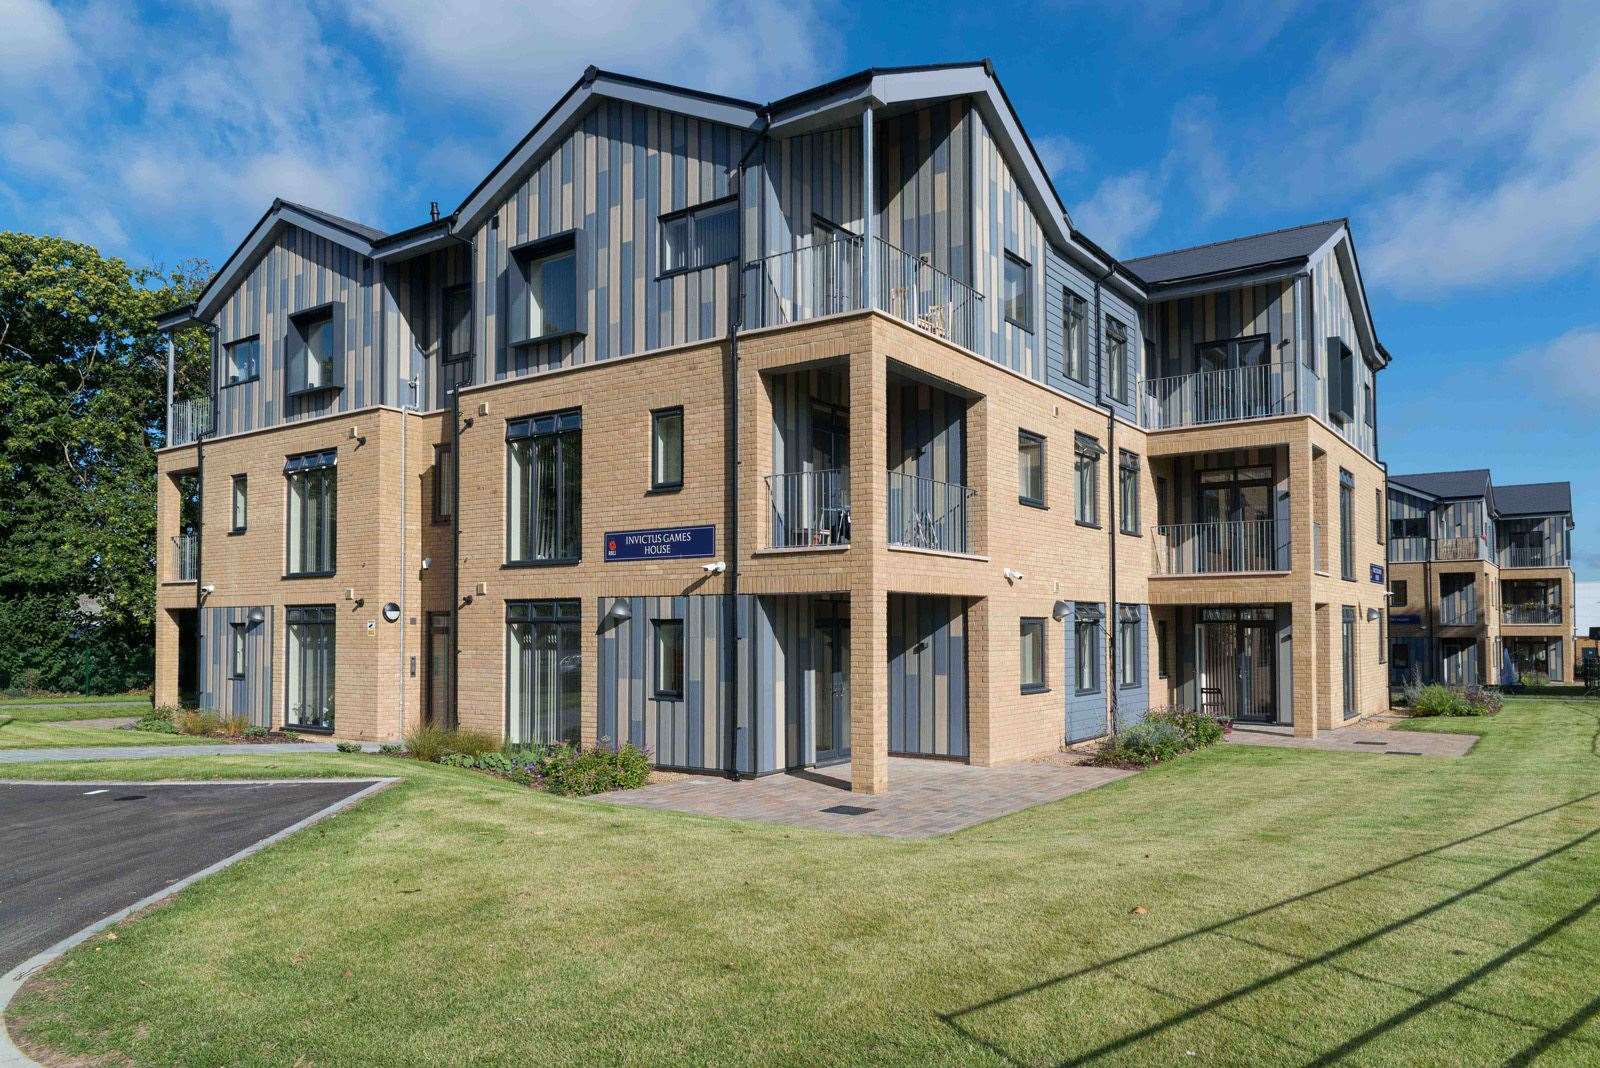 RBLI’s specially adapted apartments for injured veterans